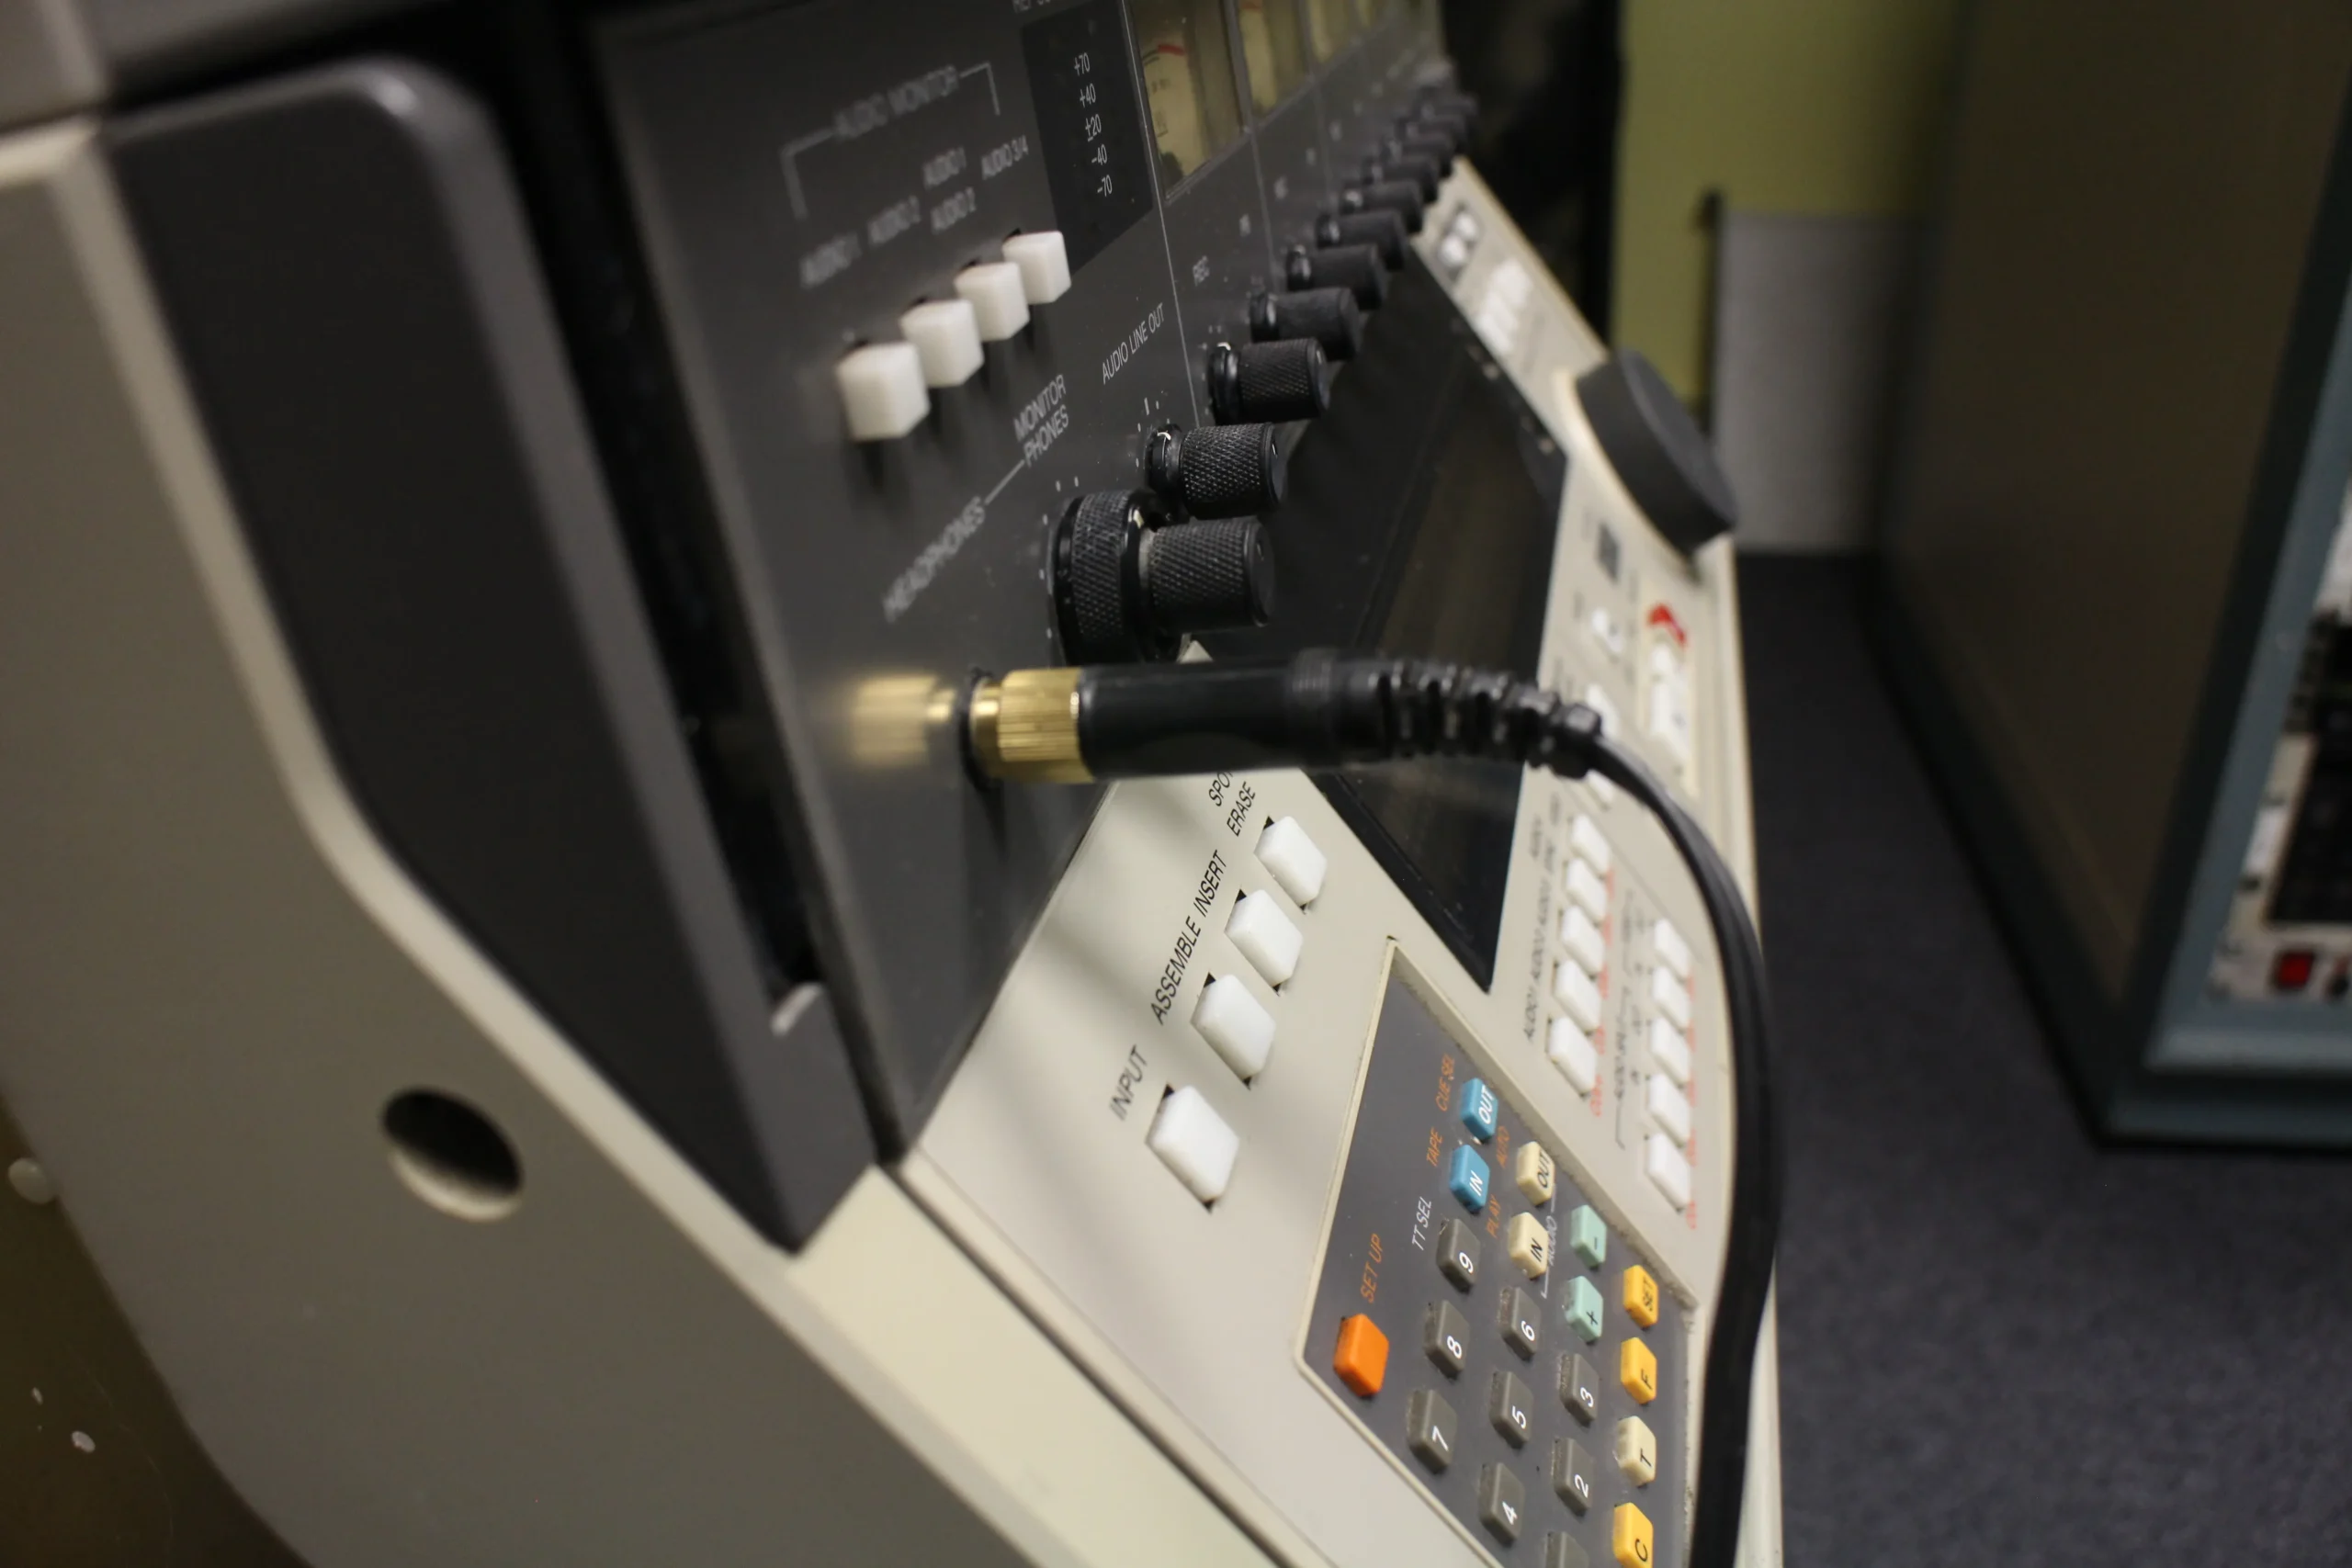 A close-up of a VCR machine with a cord attached.